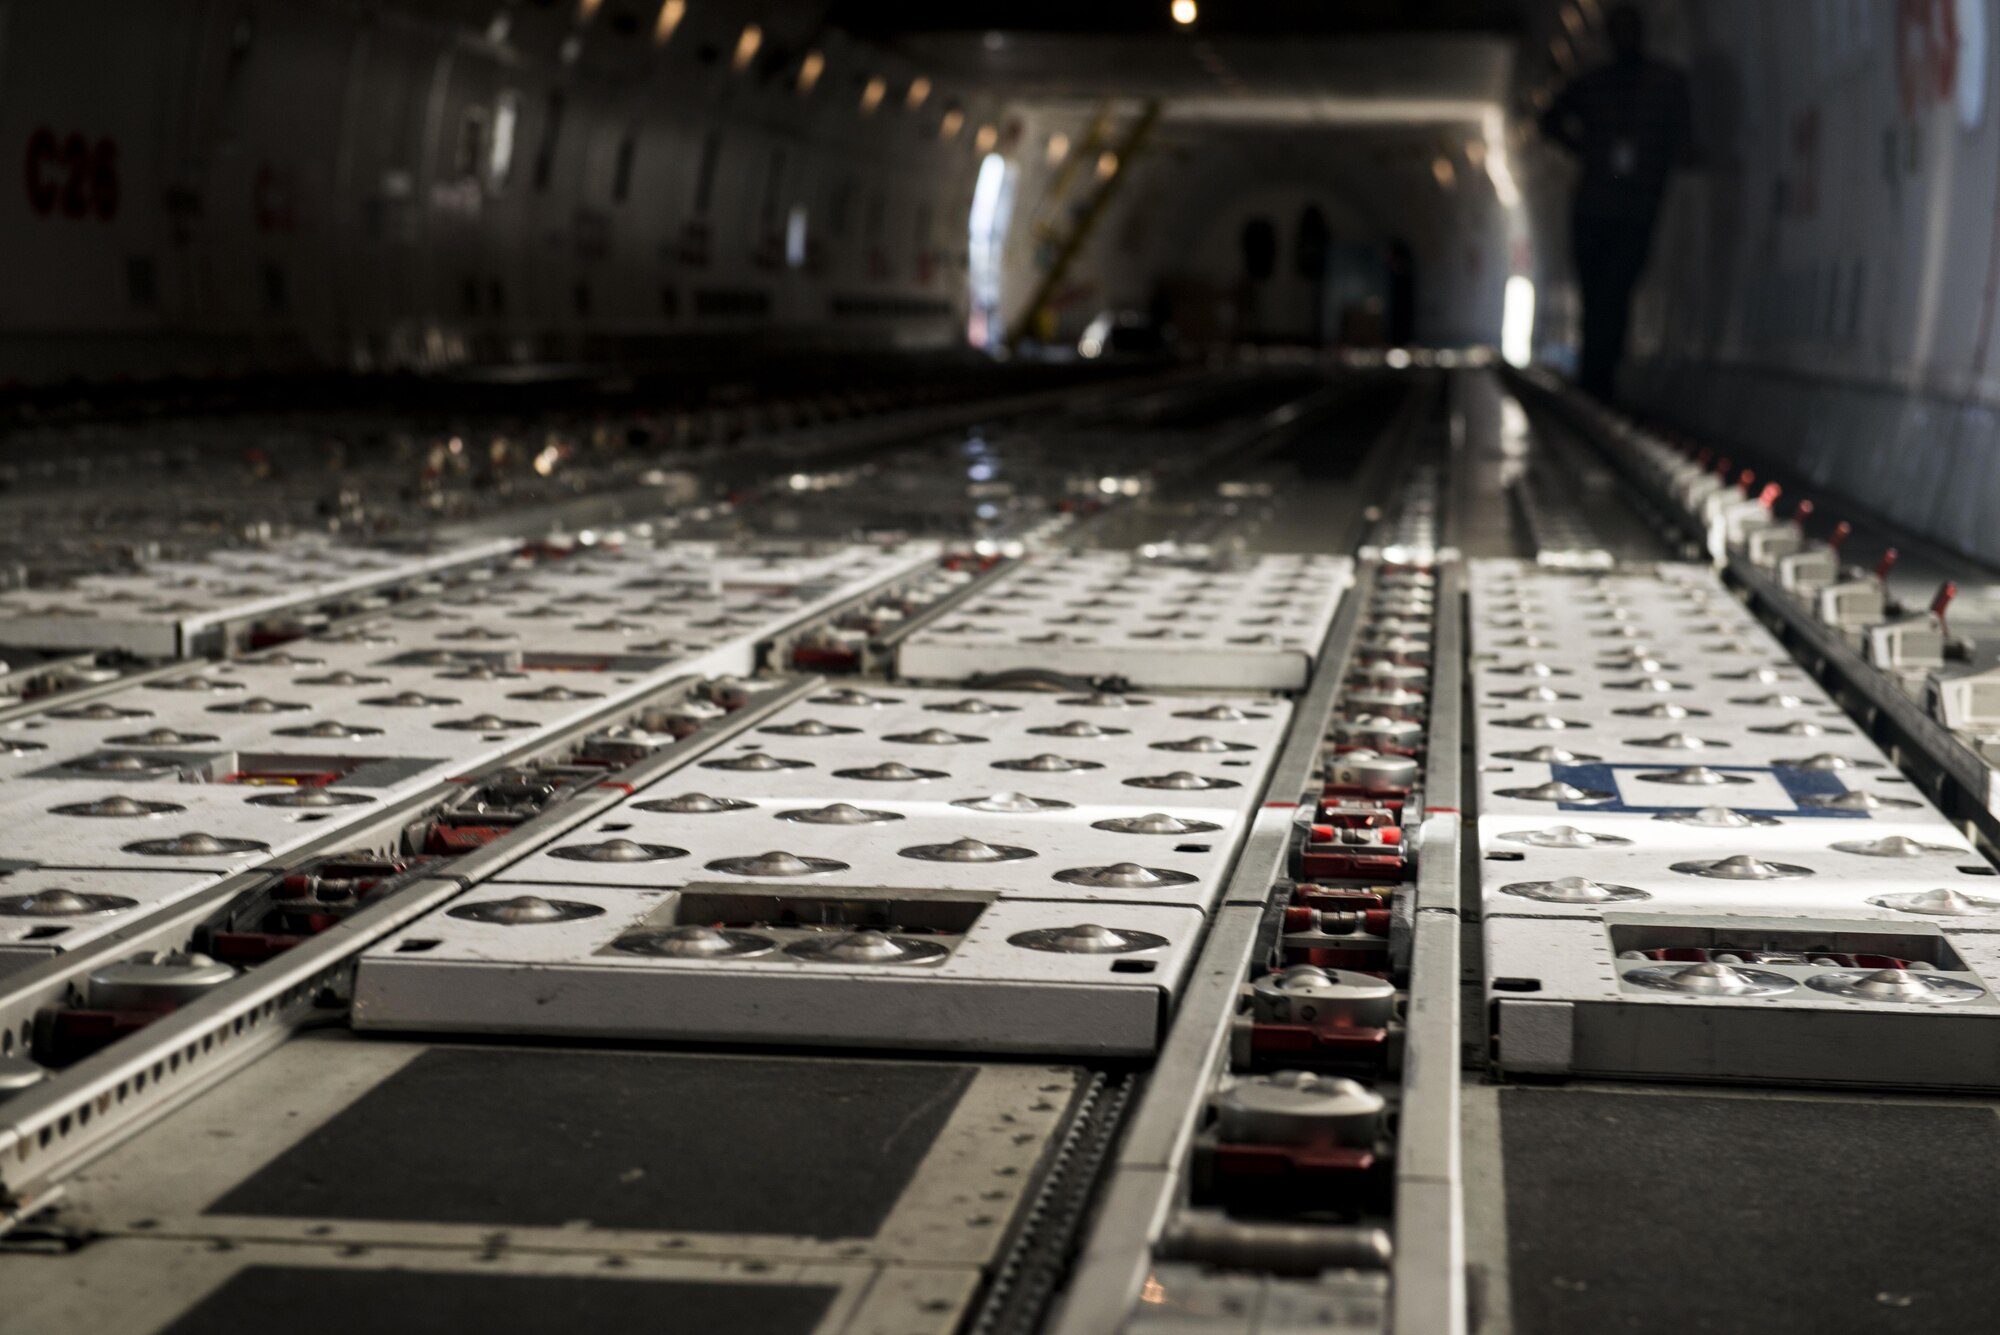 The floor of a Boeing 747 is empty prior to being loaded at Shaw Air Force Base, South Carolina, Nov. 1, 2017.